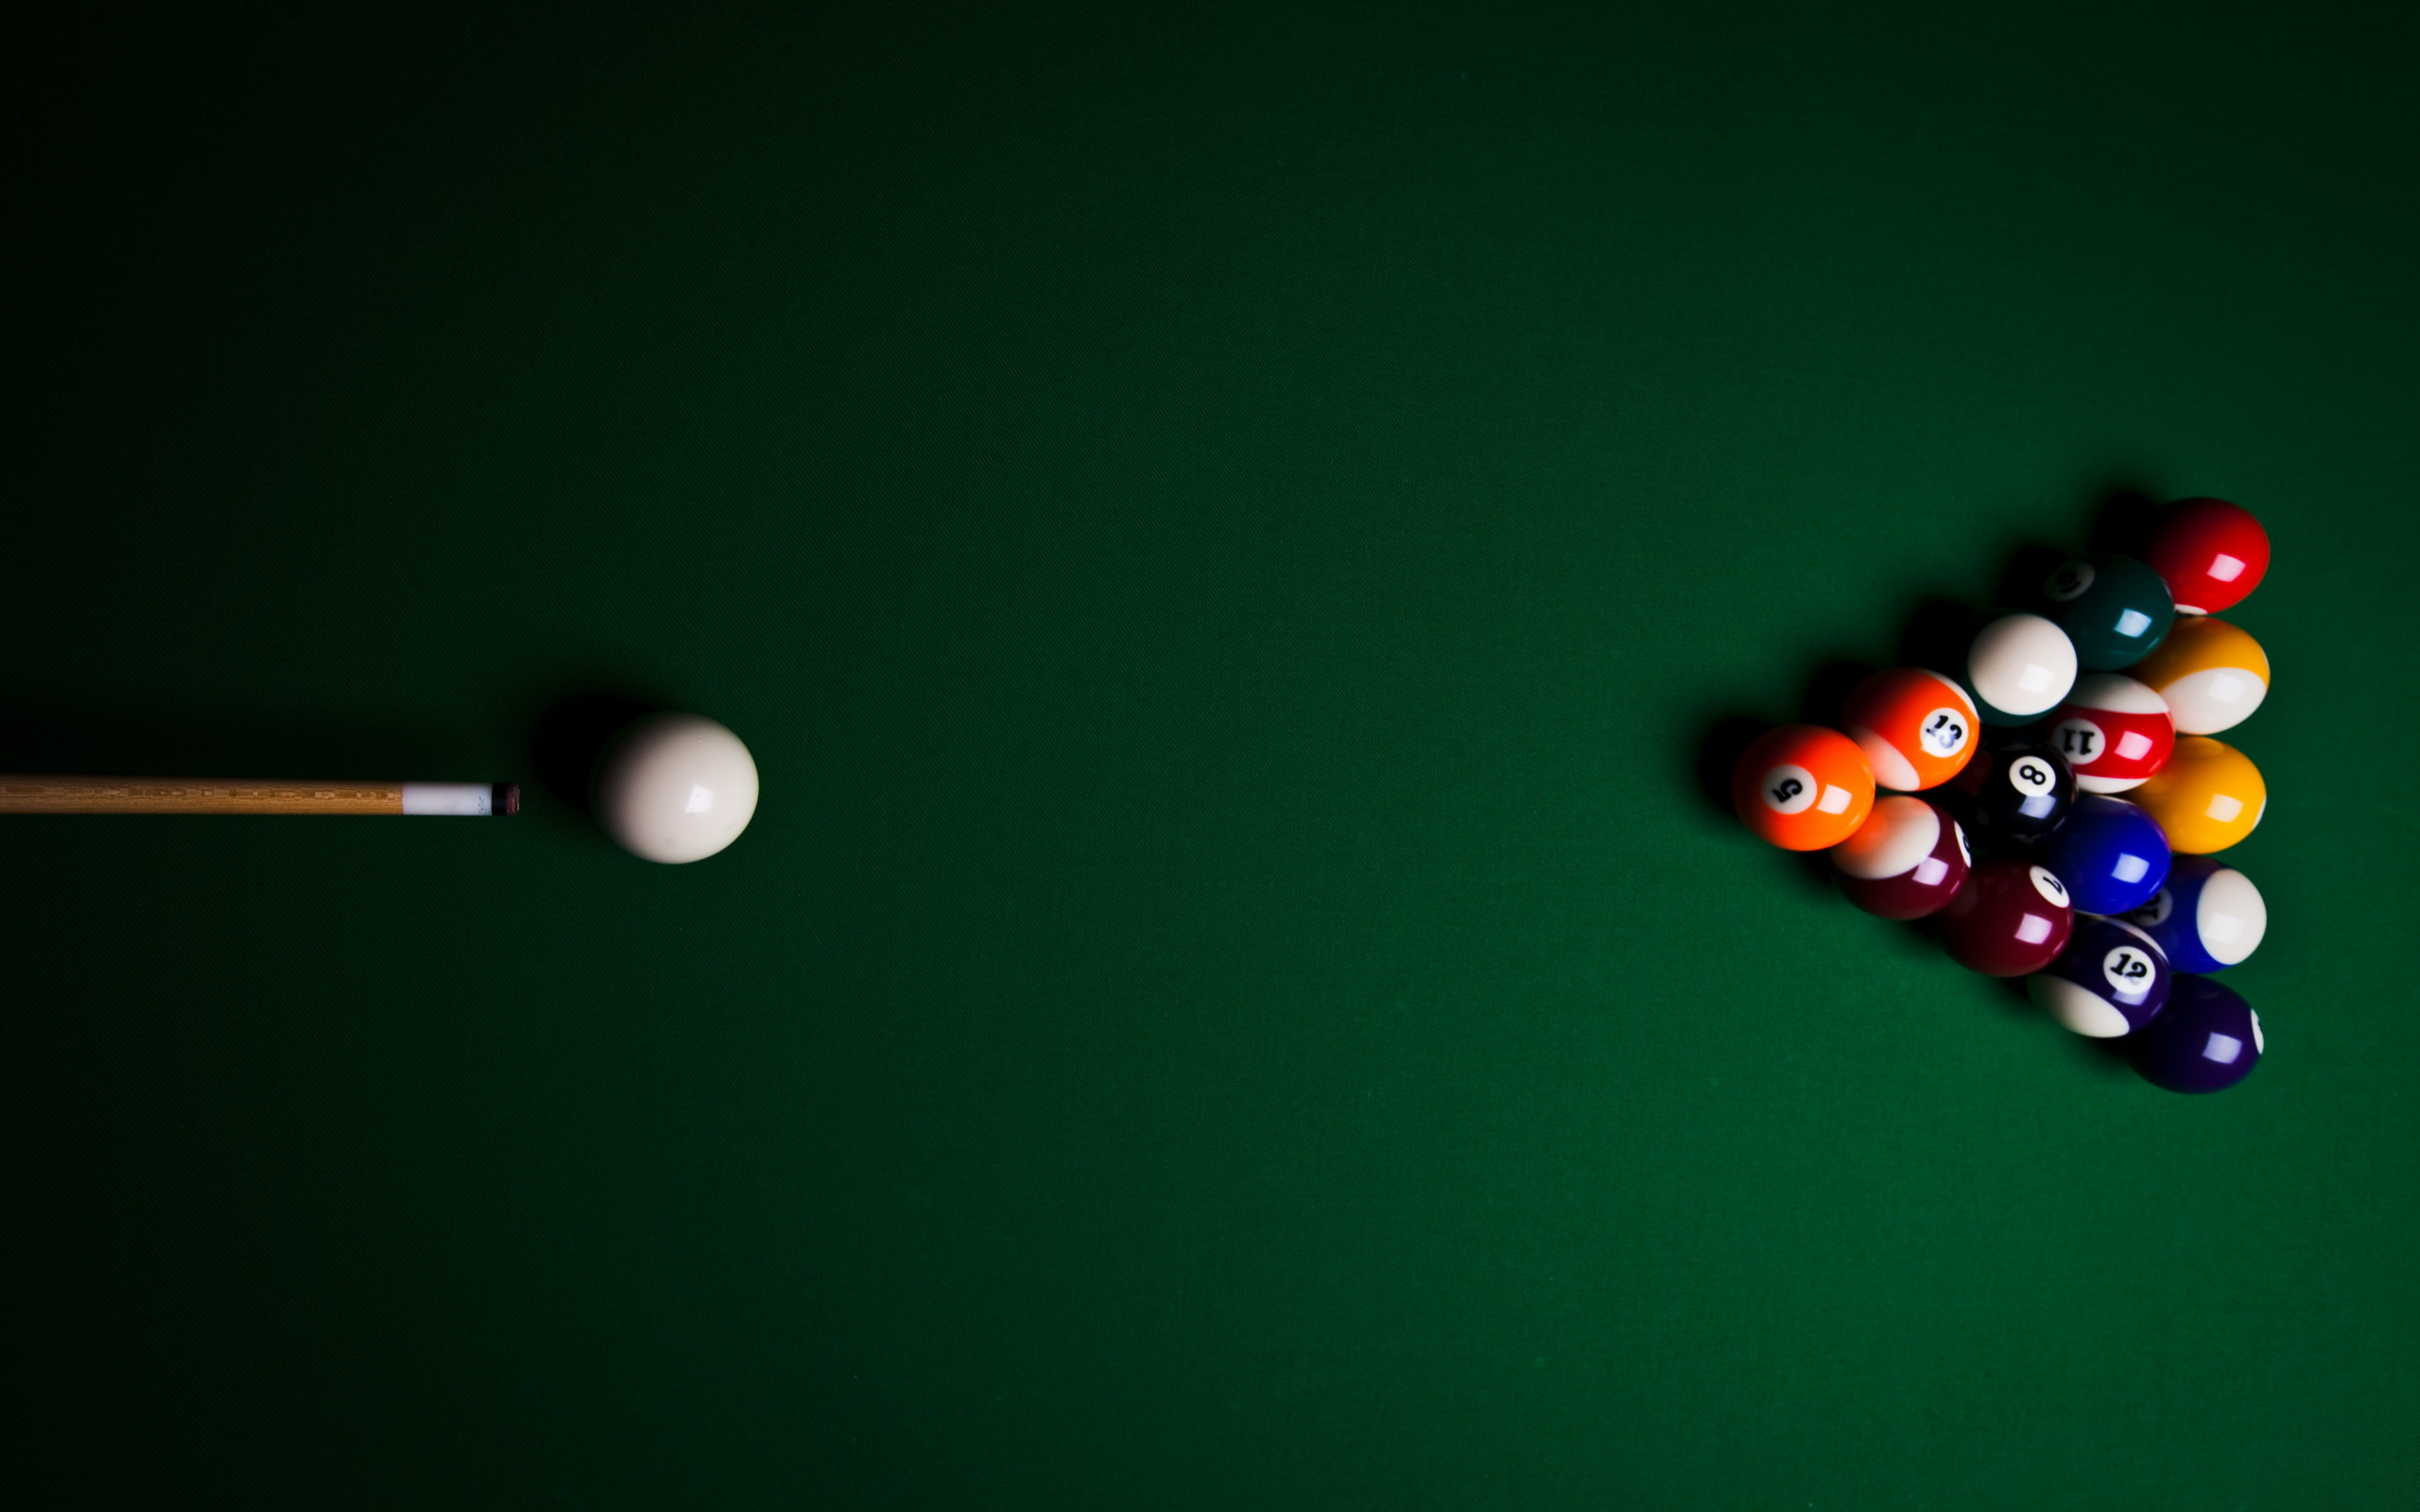 Billiards: Preparation for a break shot - the starting point of an eight-ball game, Cue. 2560x1600 HD Wallpaper.